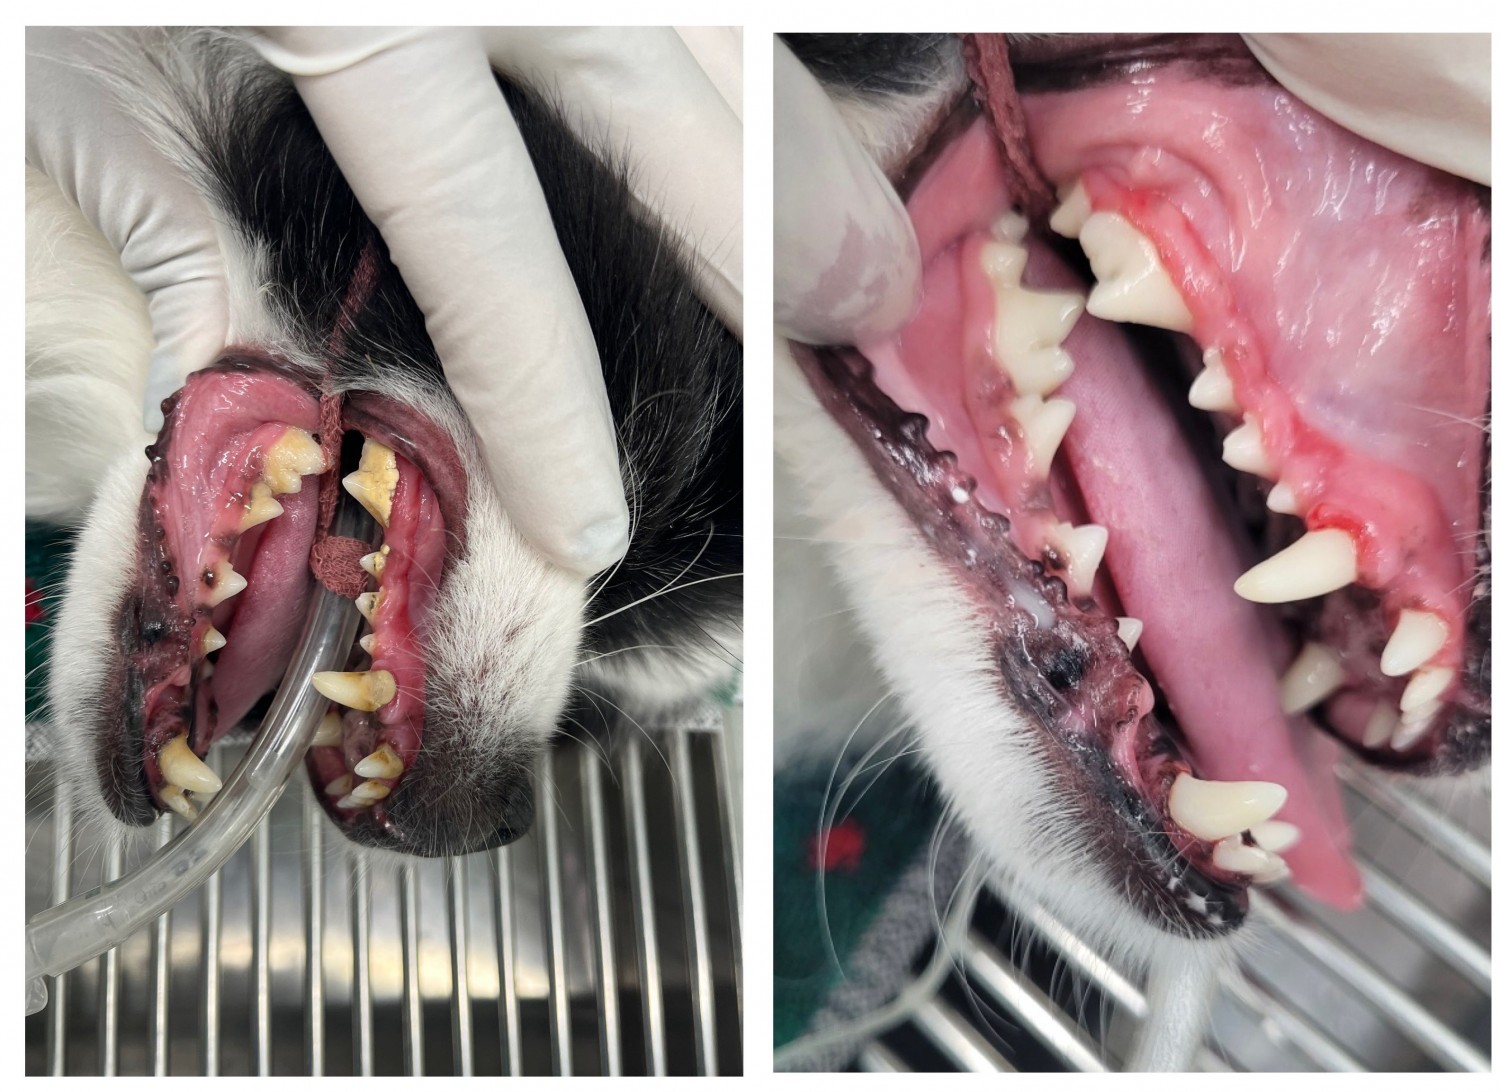 Dog's mouth being held open to show gums and teeth